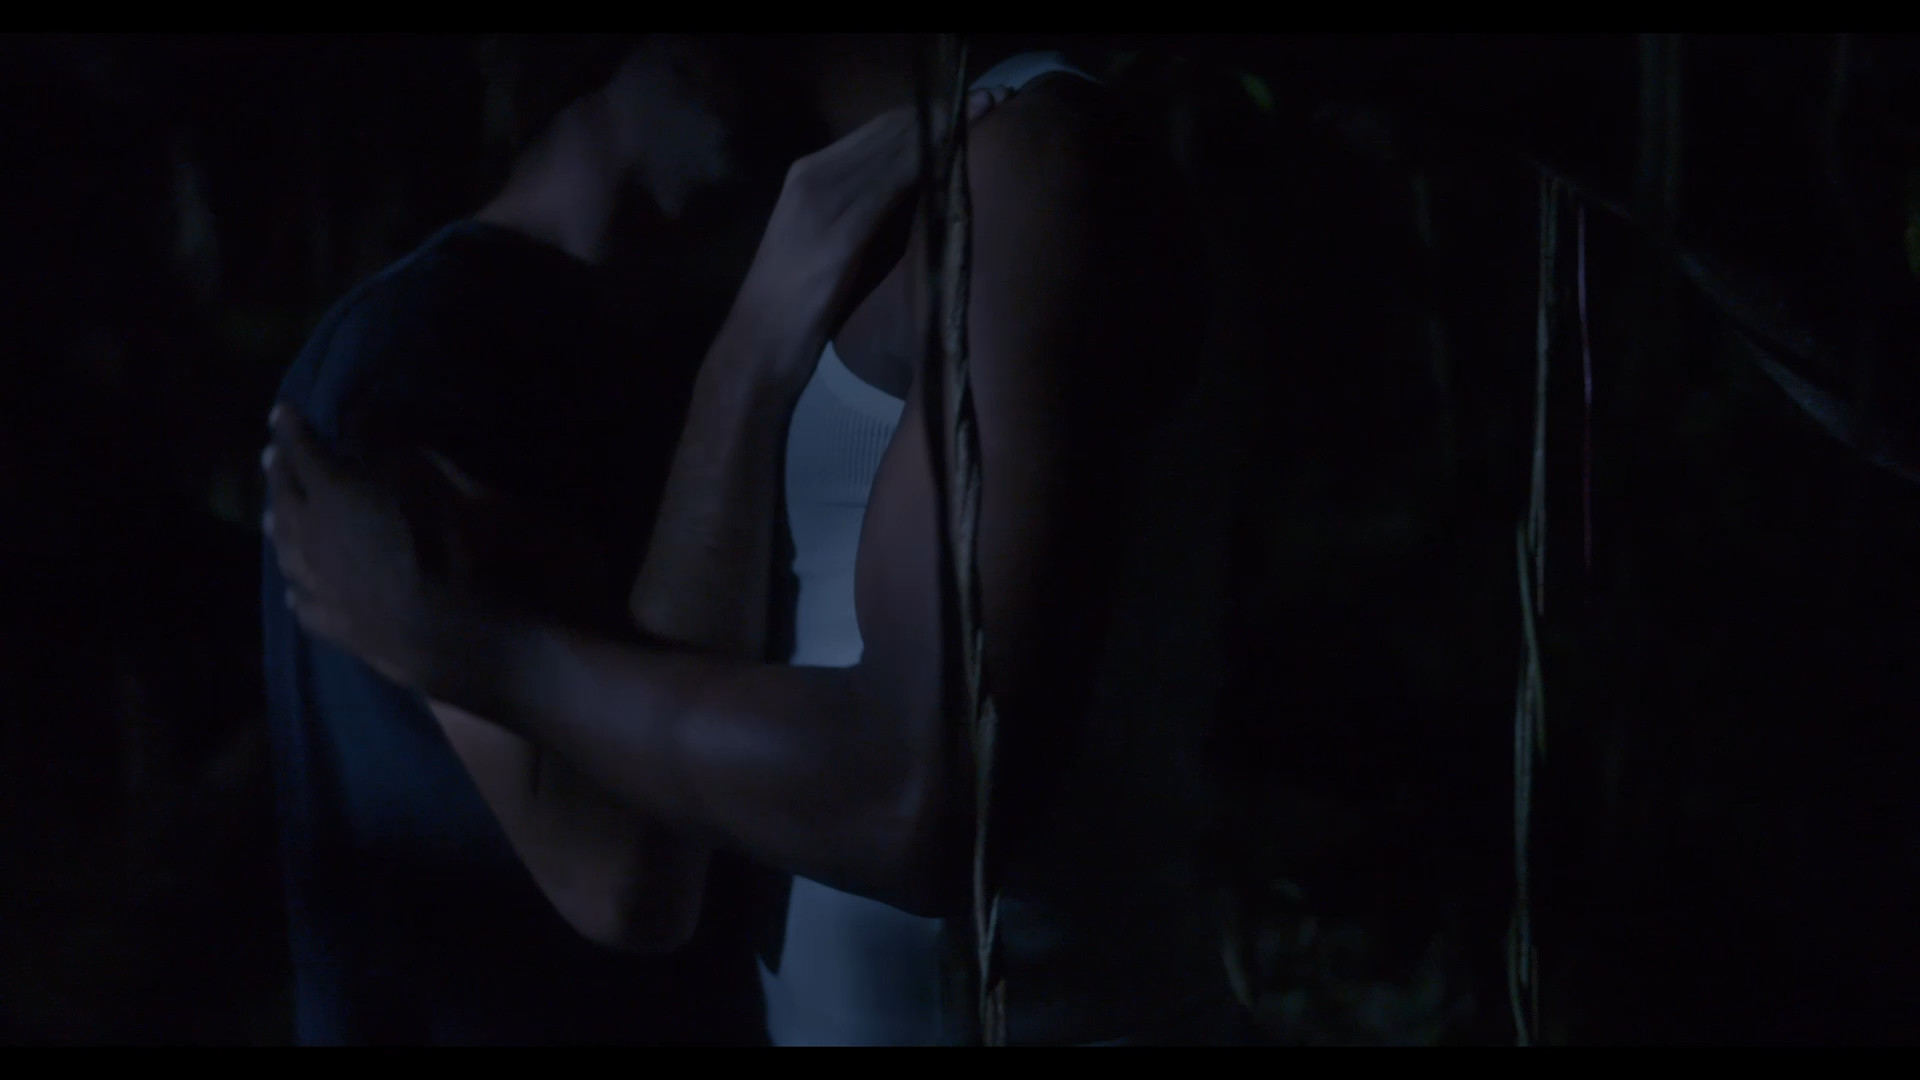 Two men embrace in a dark forest